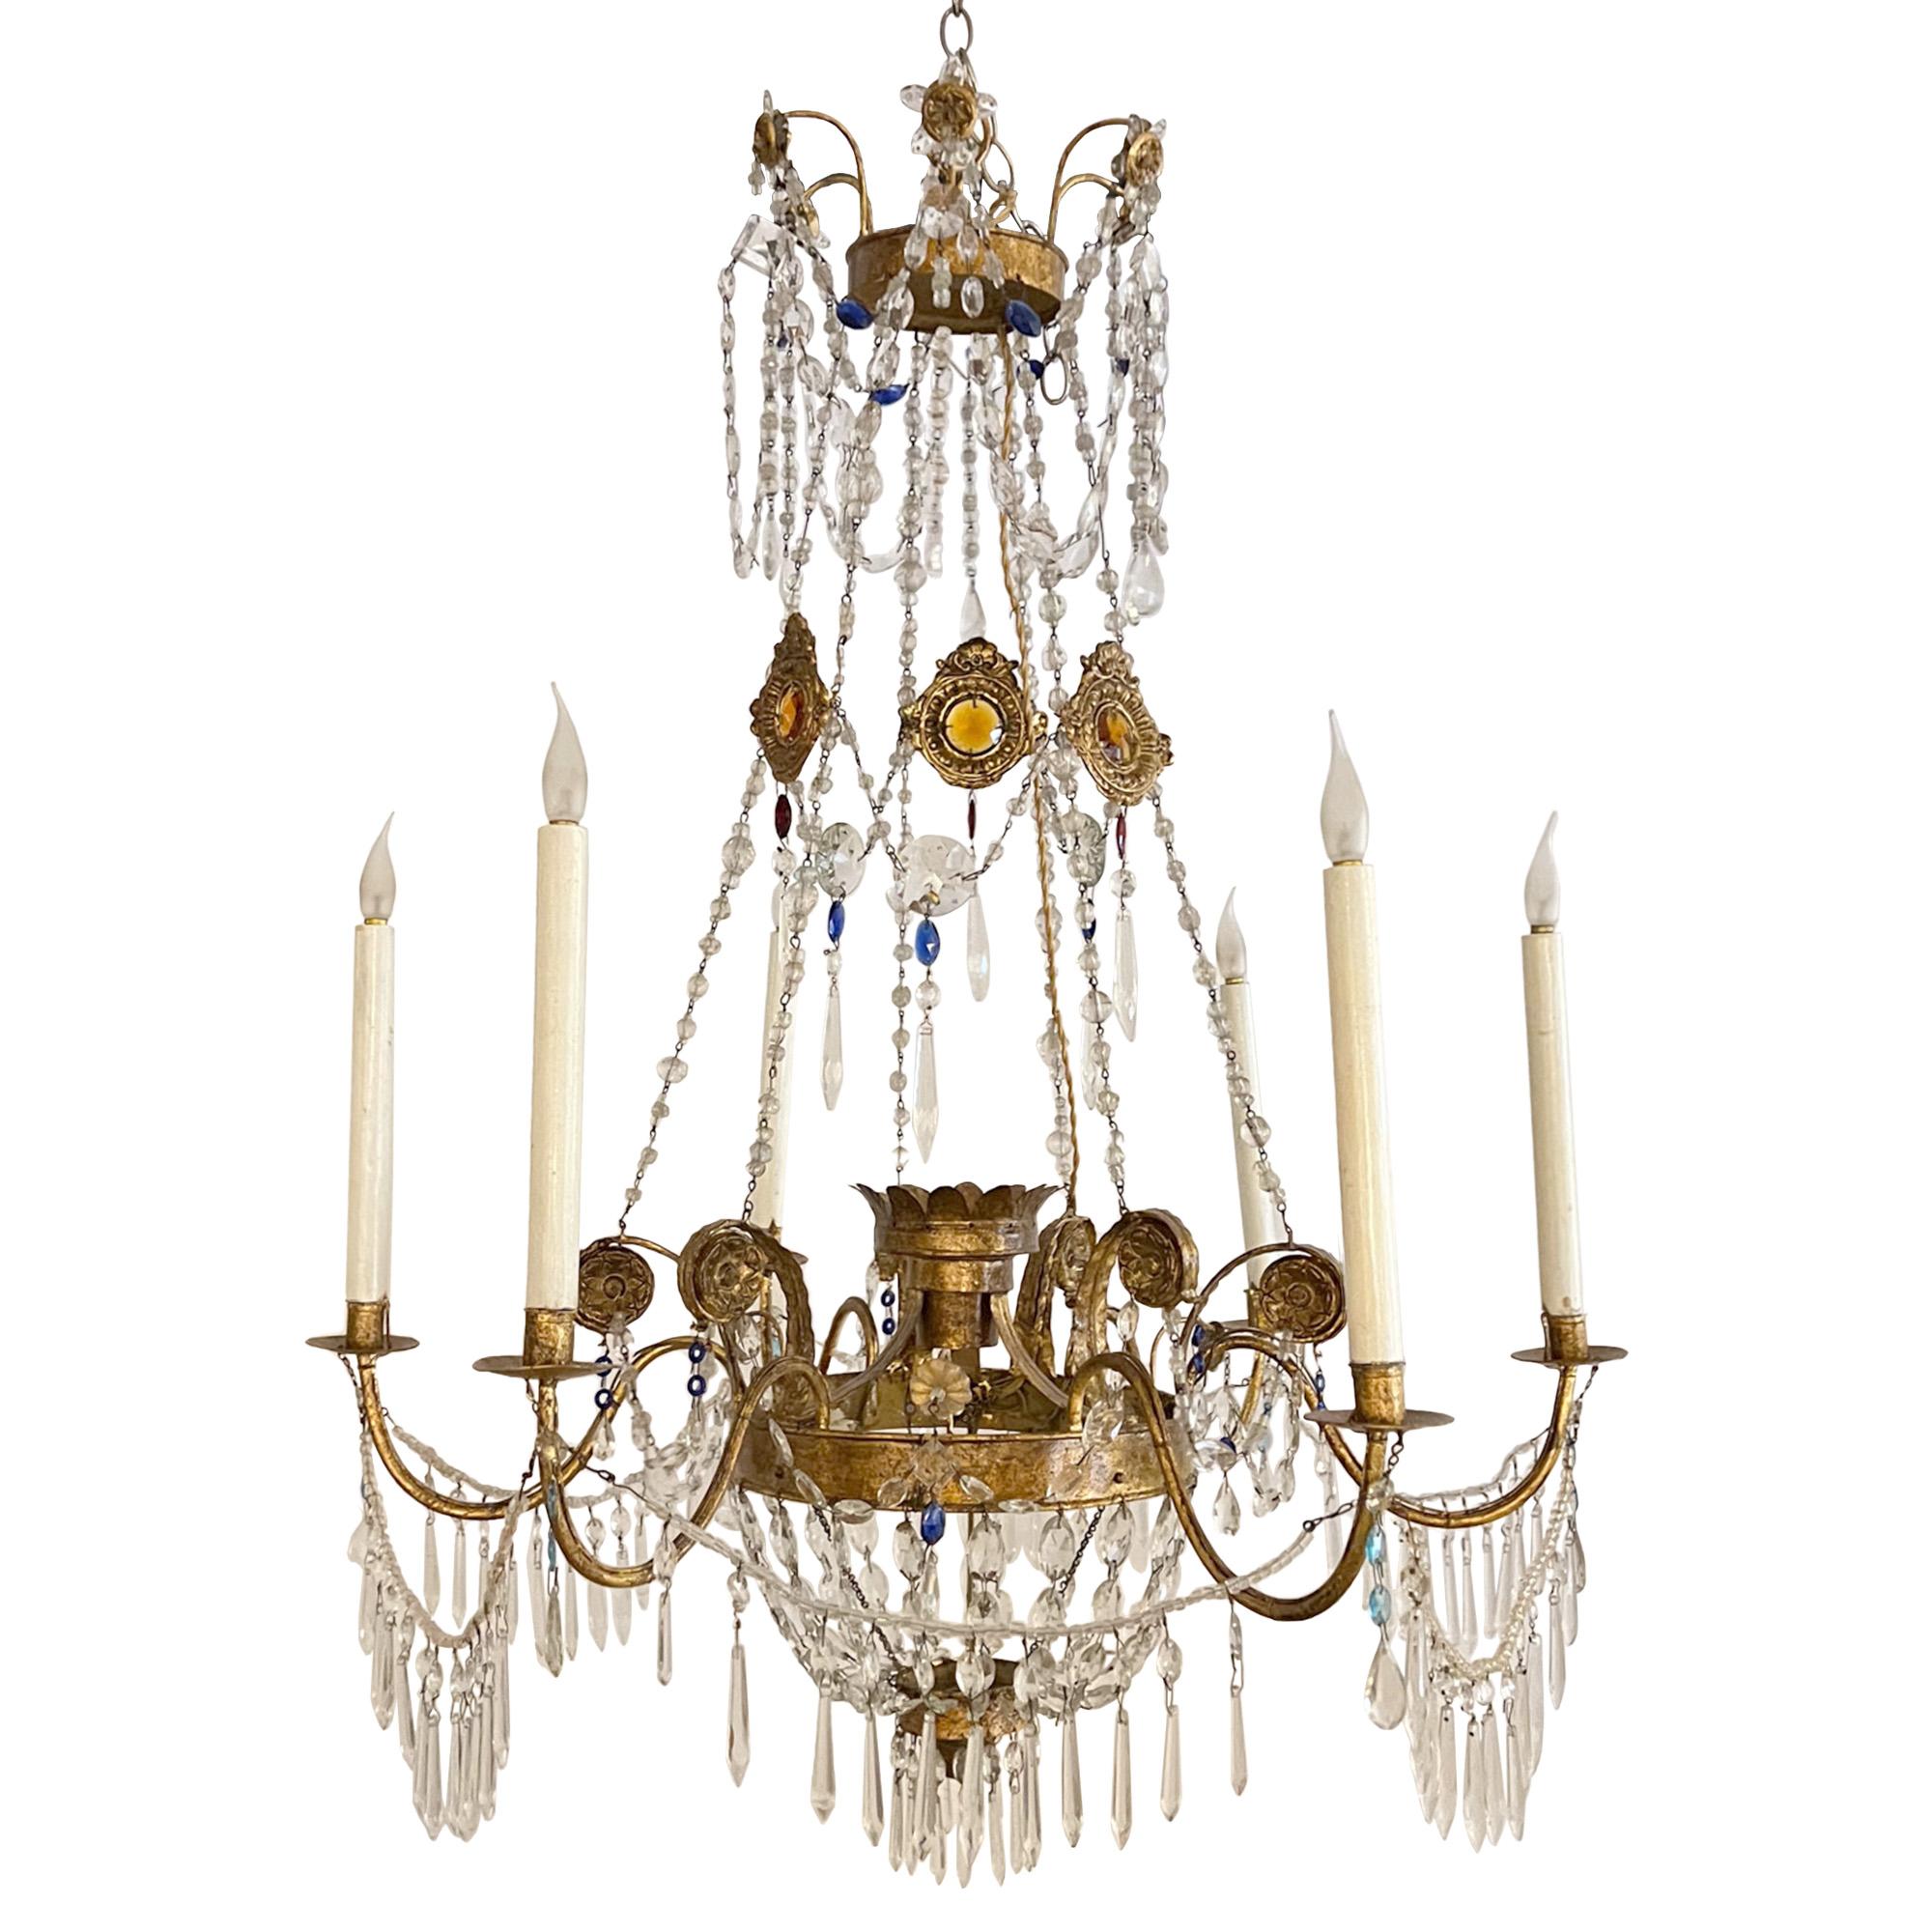 A wonderful pair of highly decorative chandeliers.

Please take a look at all our pictures to see the beading work - including coloured glass, the gilt metal scrolls and gem like glass plaques. 

These lights have been carefully restored and the